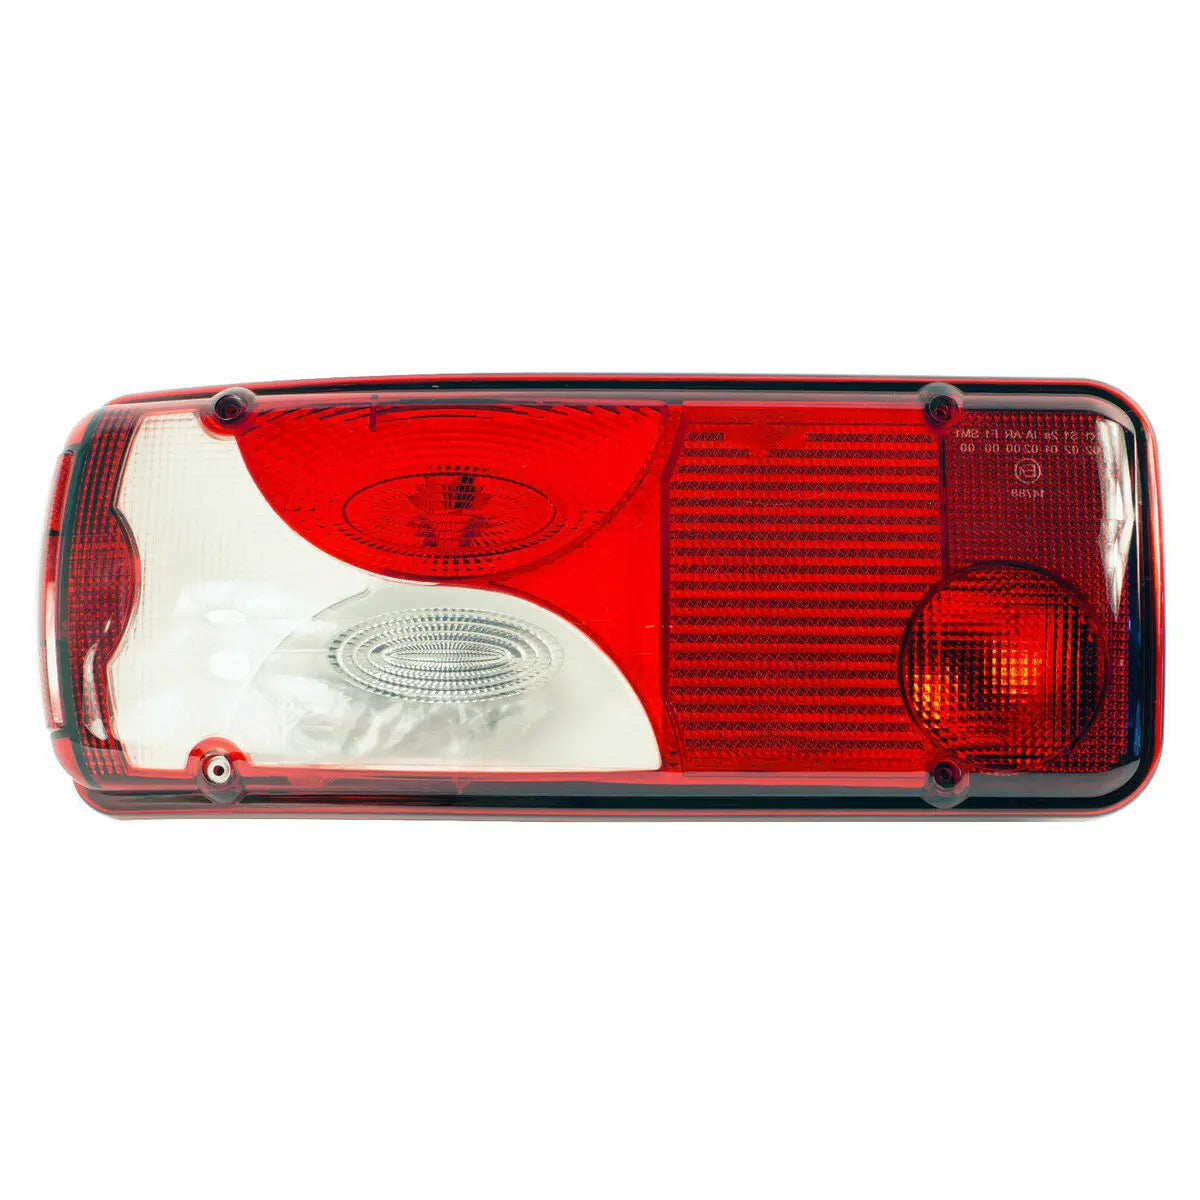 FANCHANTS 9068200464 A9068200464 Tail lamp, Left, With E Mark, Without Bulb FOR Mercedes-Benz Sprinter 906/907/910 FANCHANTS Aftermarket Auto Parts